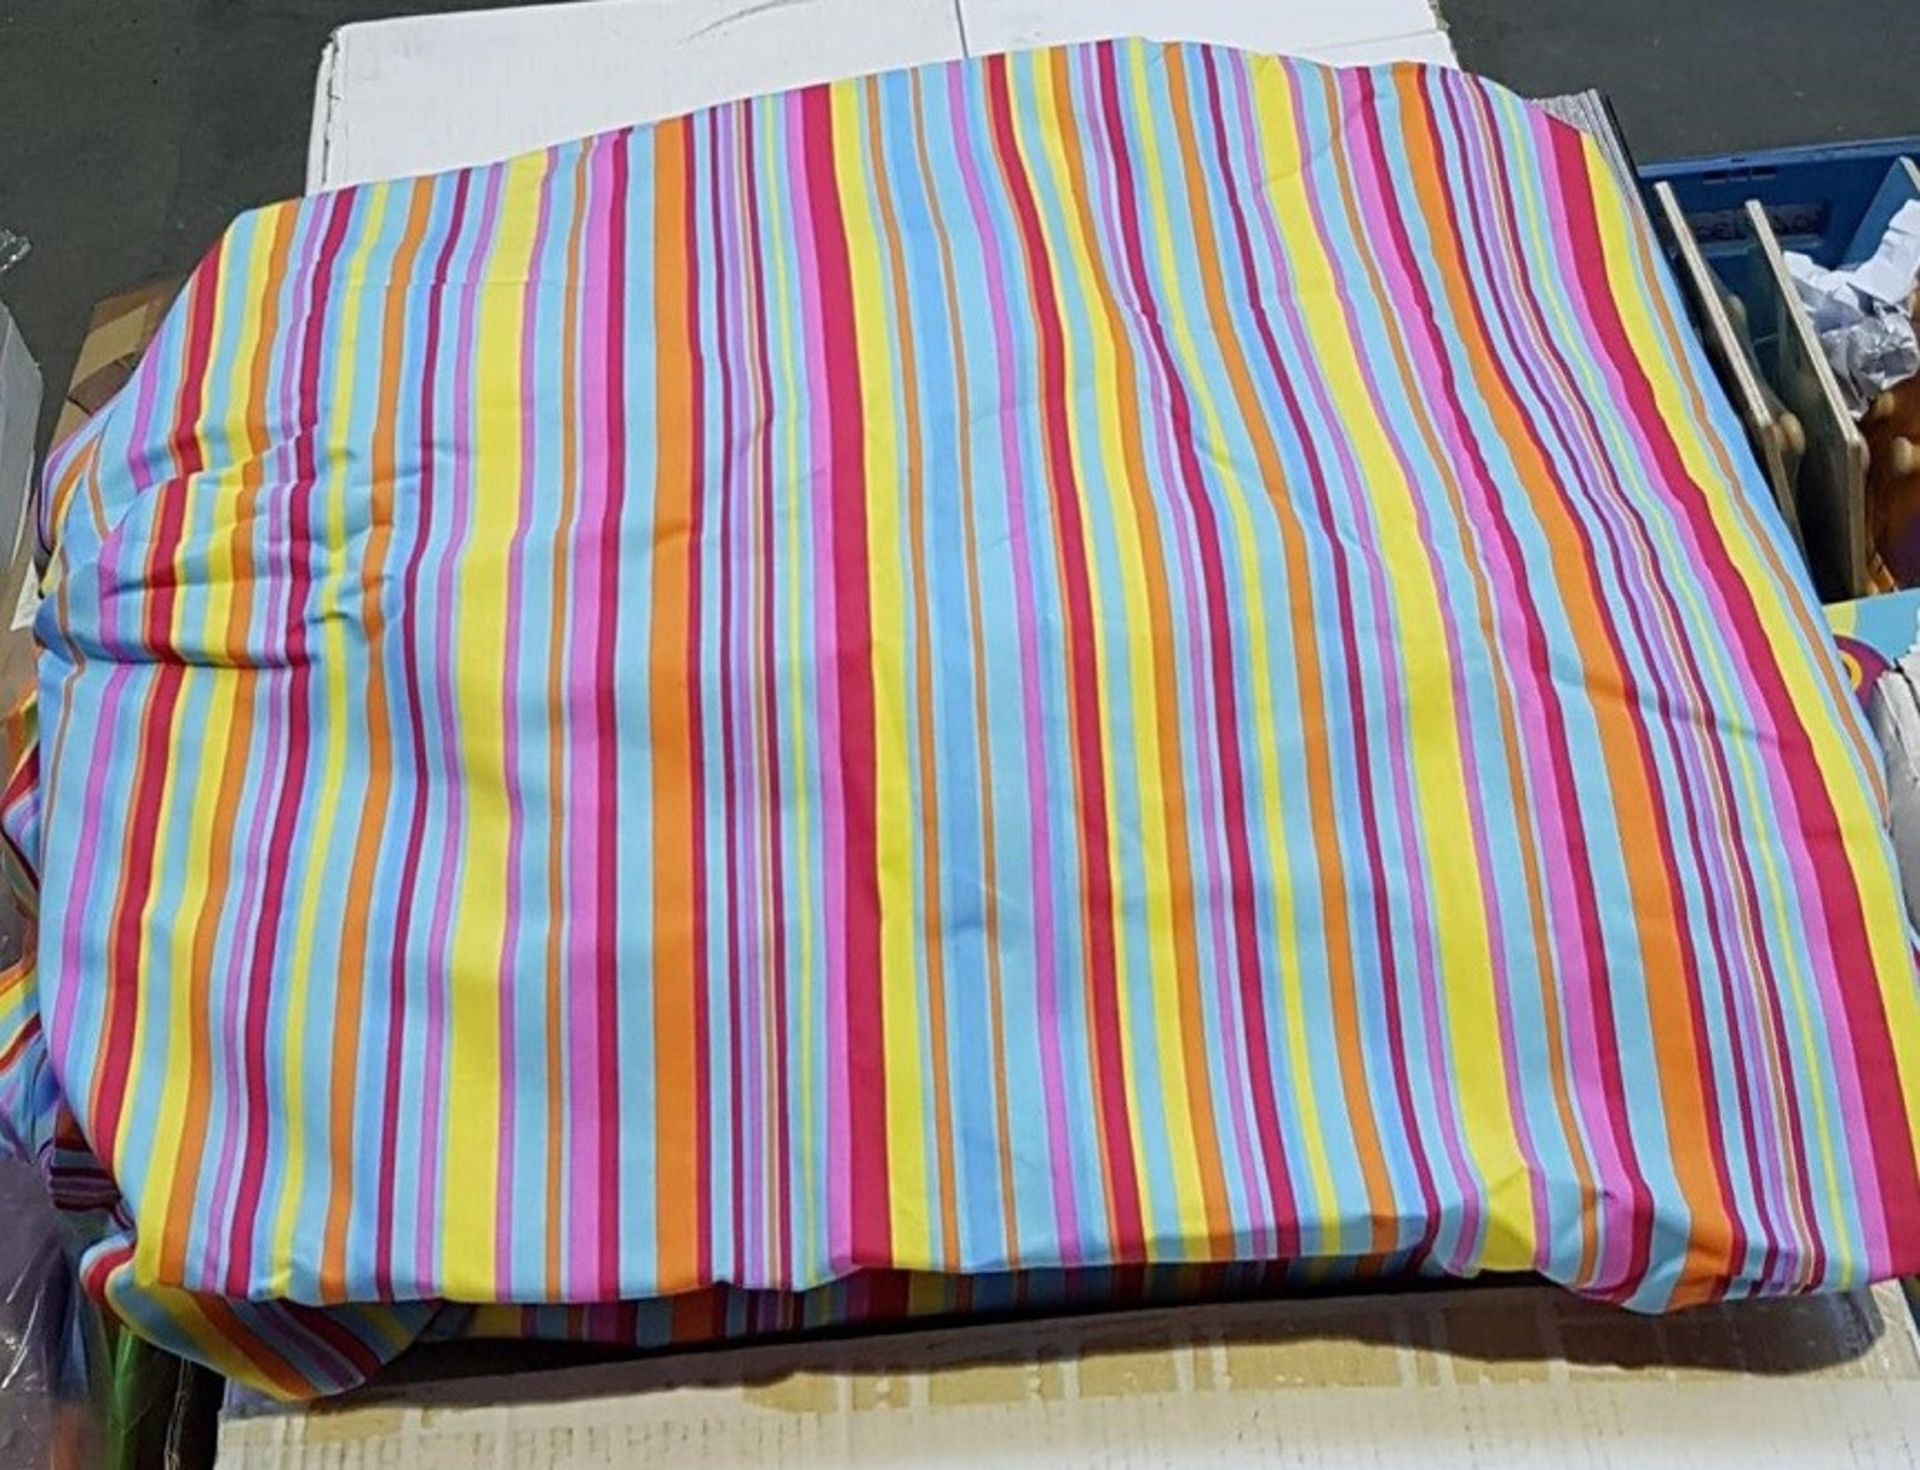 1 AS NEW BAGGED RAINBOW STRIPE GAZEBO COVER, RRP £72.00 (VIEWING HIGHLY RECOMMENDED) - Image 2 of 2